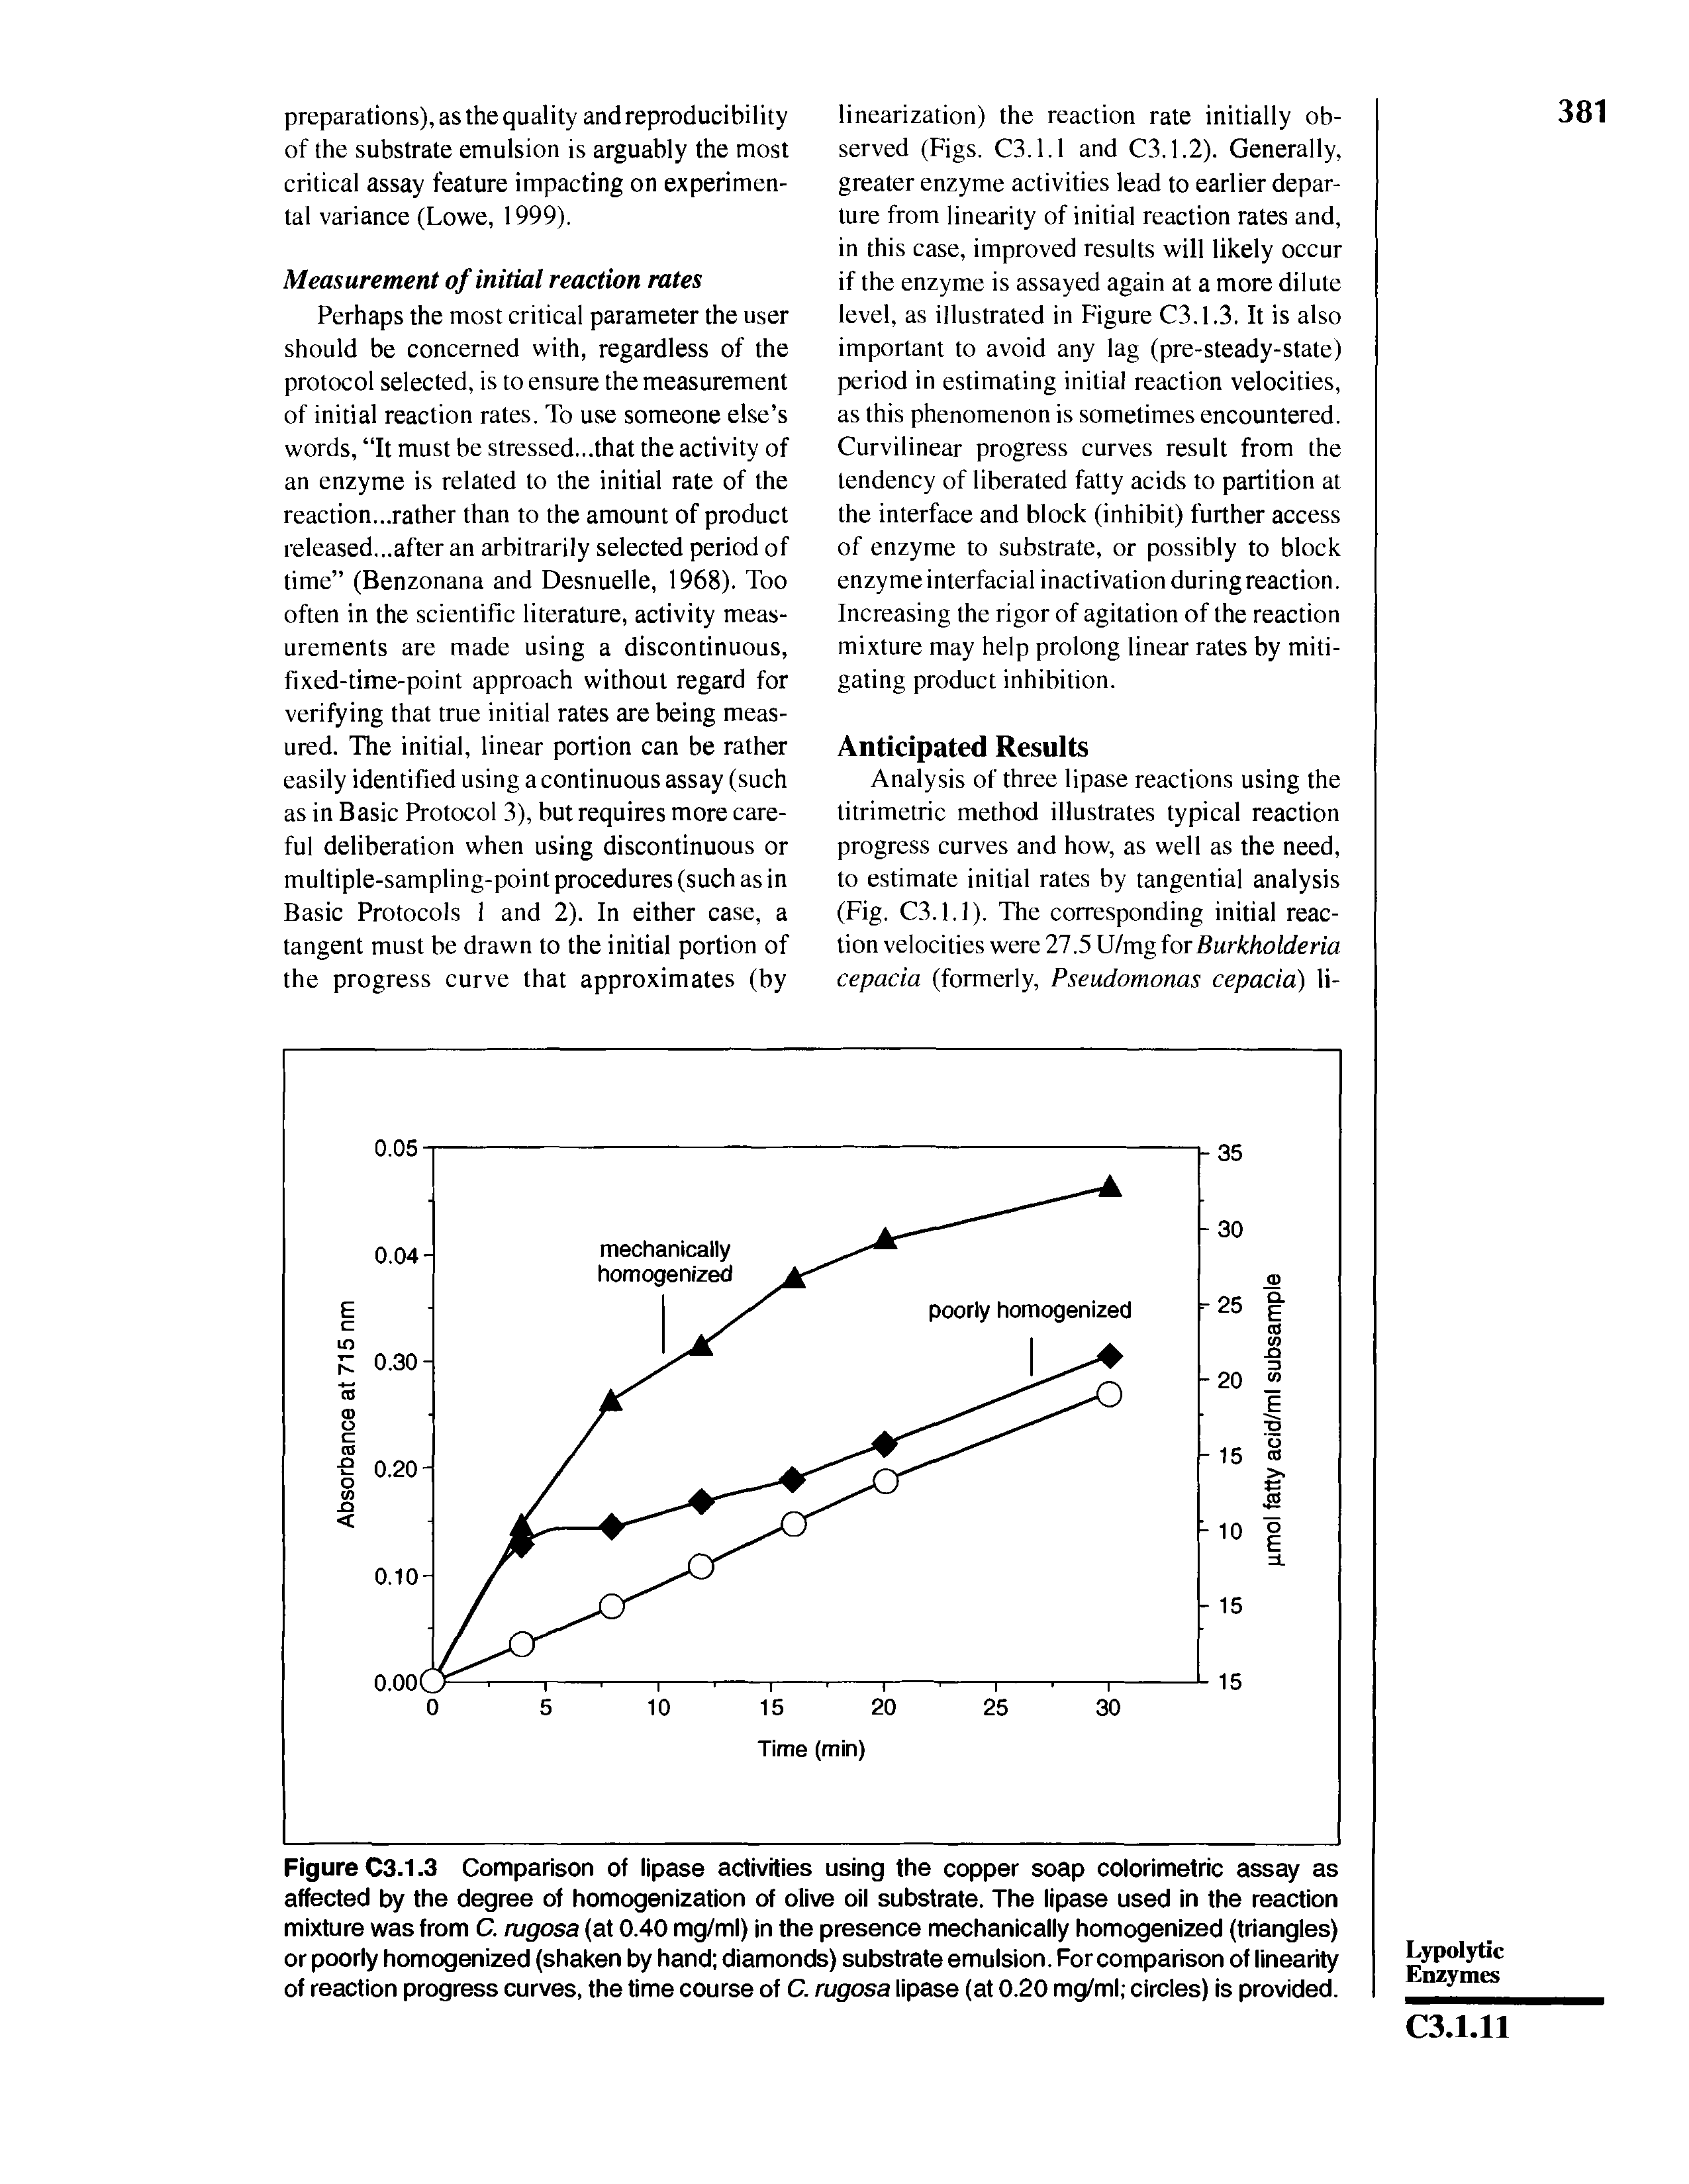 Figure C3.1.3 Comparison of lipase activities using the copper soap colorimetric assay as affected by the degree of homogenization of olive oil substrate. The lipase used in the reaction mixture was from C. rugosa (at 0.40 mg/ml) in the presence mechanically homogenized (triangles) or poorly homogenized (shaken by hand diamonds) substrate emulsion. For comparison of linearity of reaction progress curves, the time course of C. rugosa lipase (at 0.20 mg/ml circles) is provided.